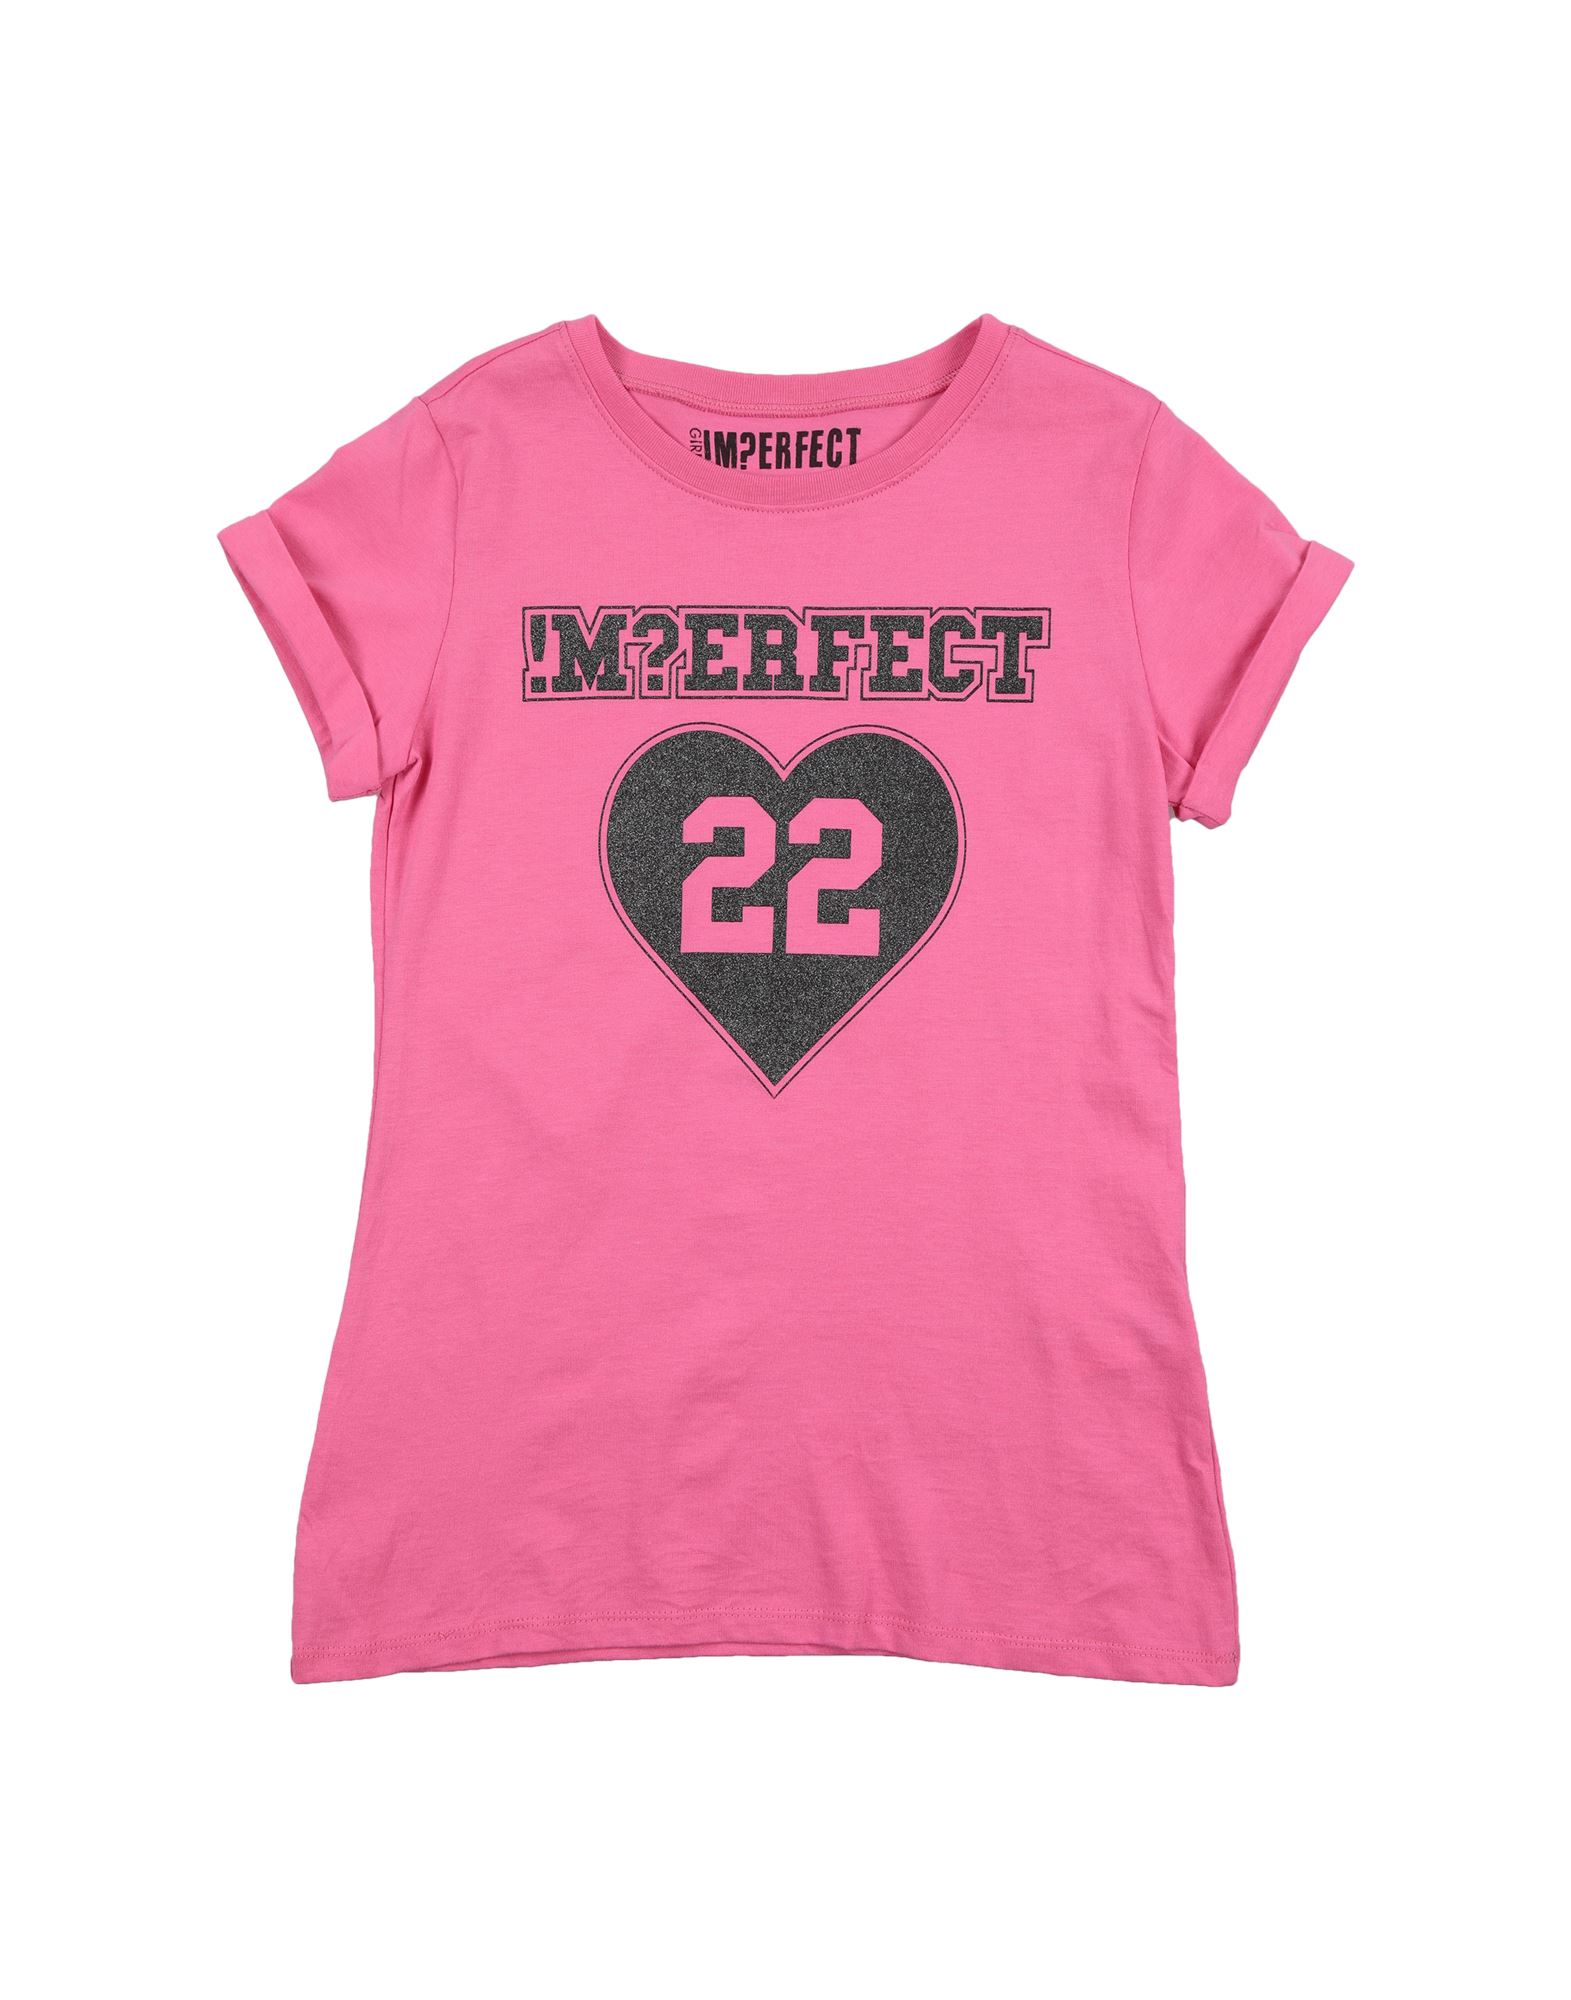 !m?erfect Kids'  T-shirts In Pink